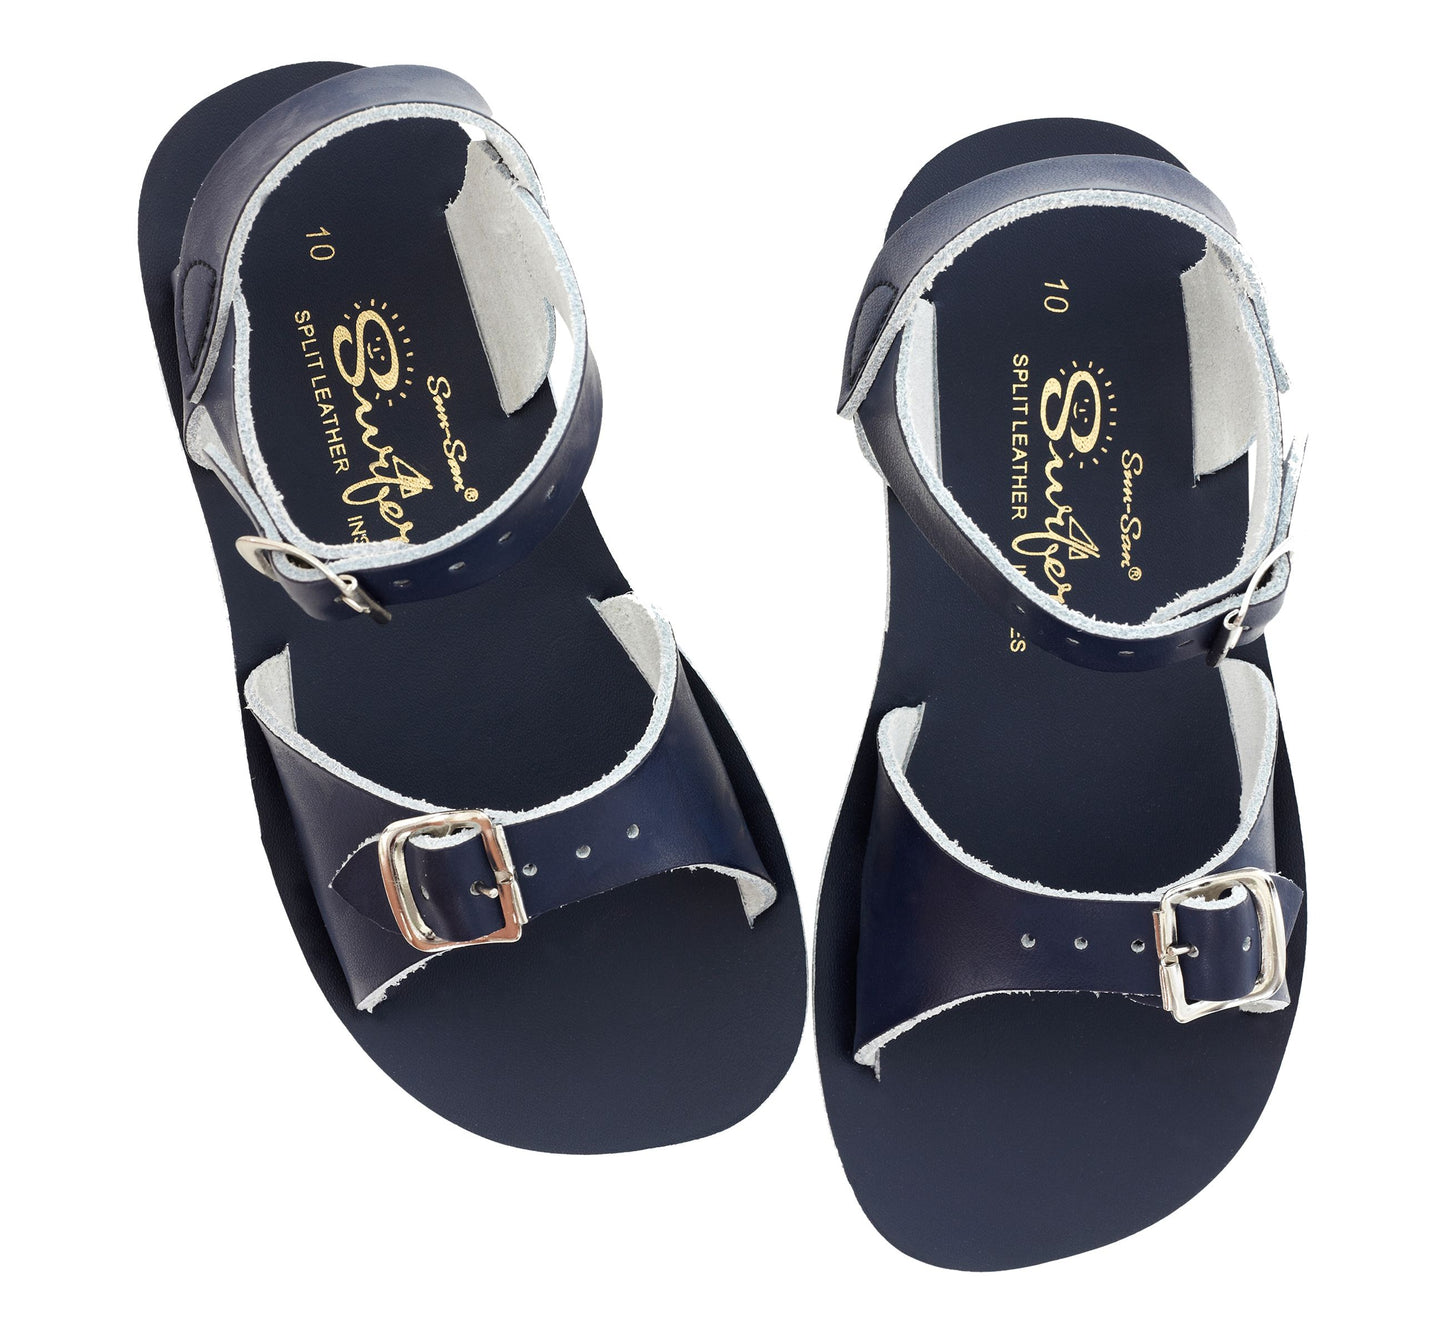 A unisex sandal by Salt Water Sandals in navy with double buckle fastening across the instep and around the ankle. Open Toe and Sling-back. Top view.